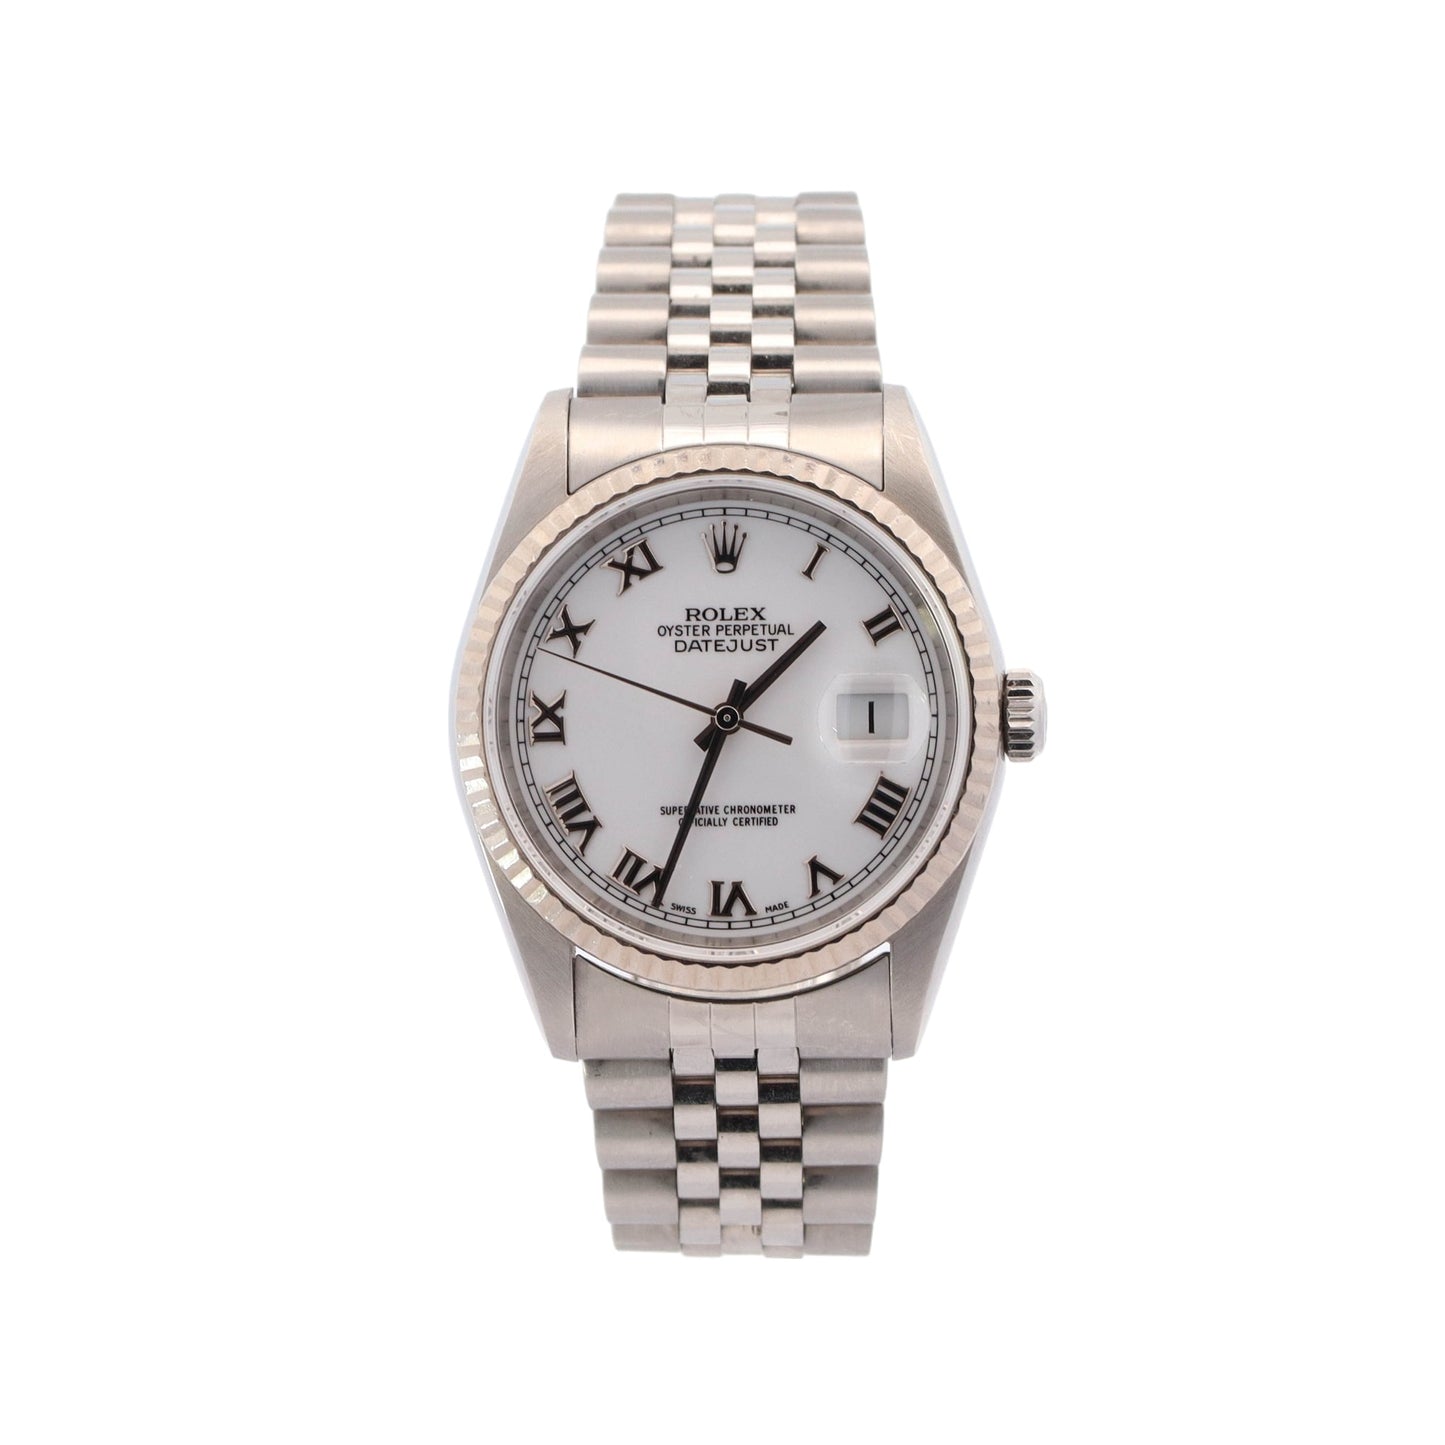 Rolex Datejust Stainless Steel 36mm White Roman Dial Watch  Reference #: 16234